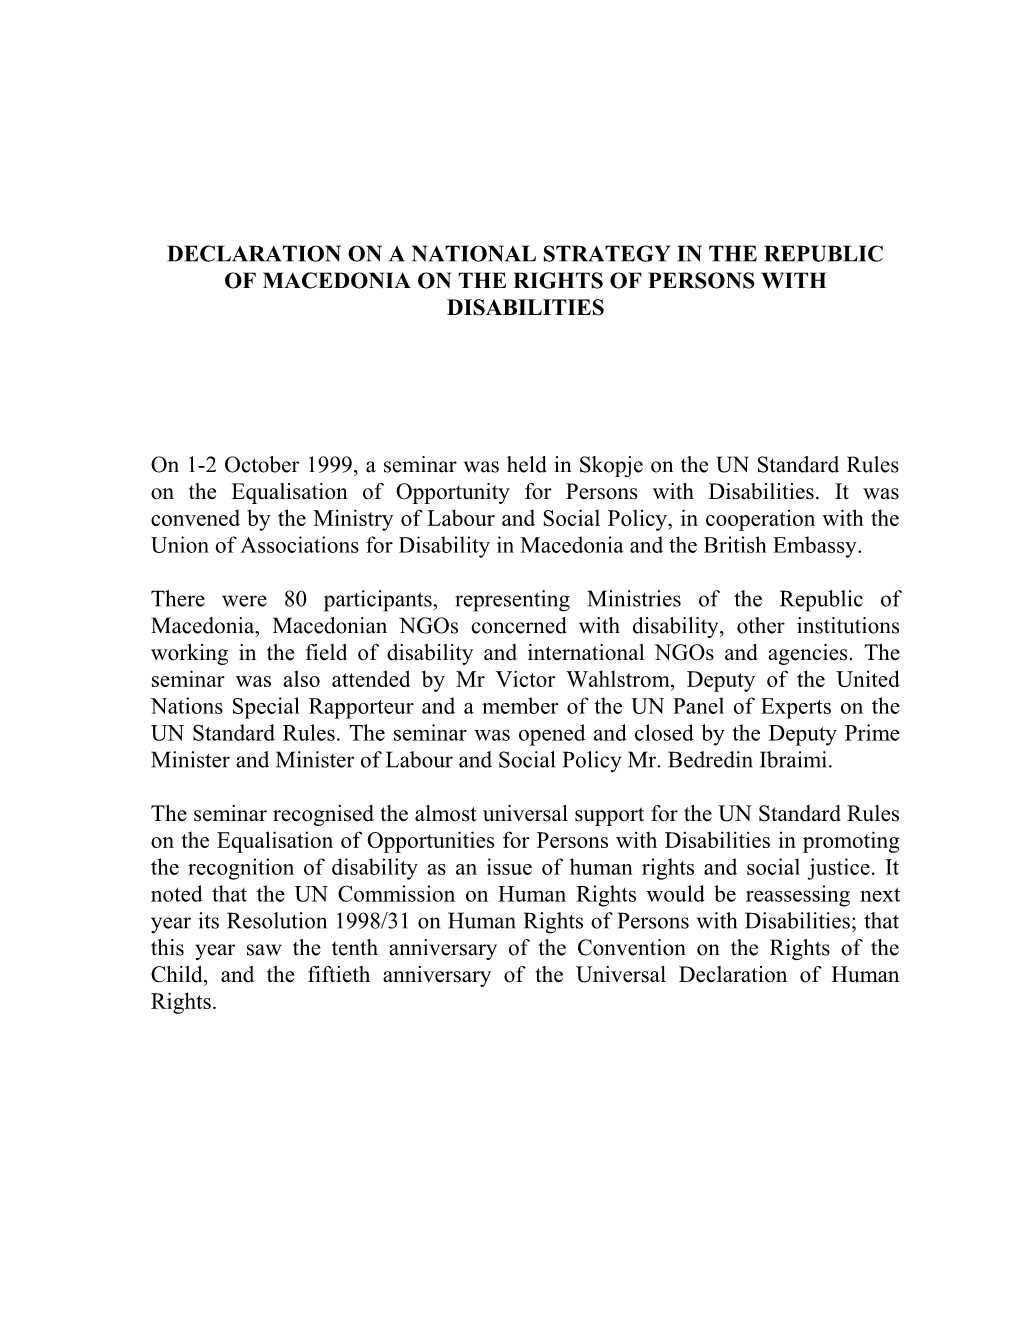 Declaration on a National Strategy in the Republic of Macedonia on the Rights of Persons